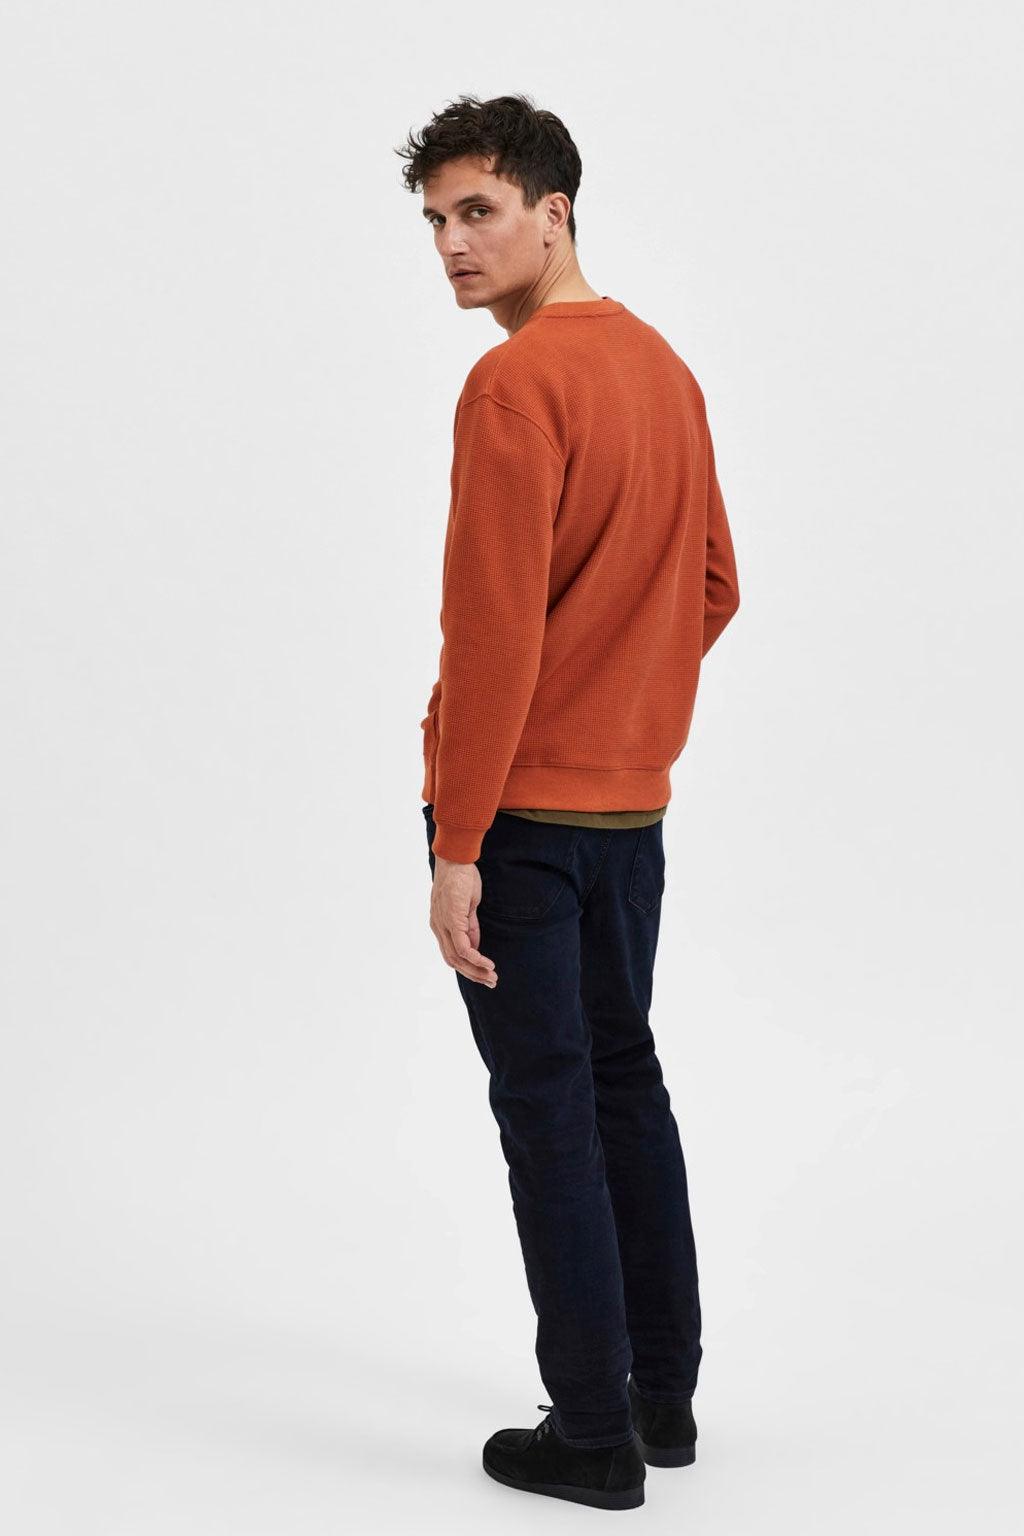 Selected sweater | Big Boss | the menswear concept